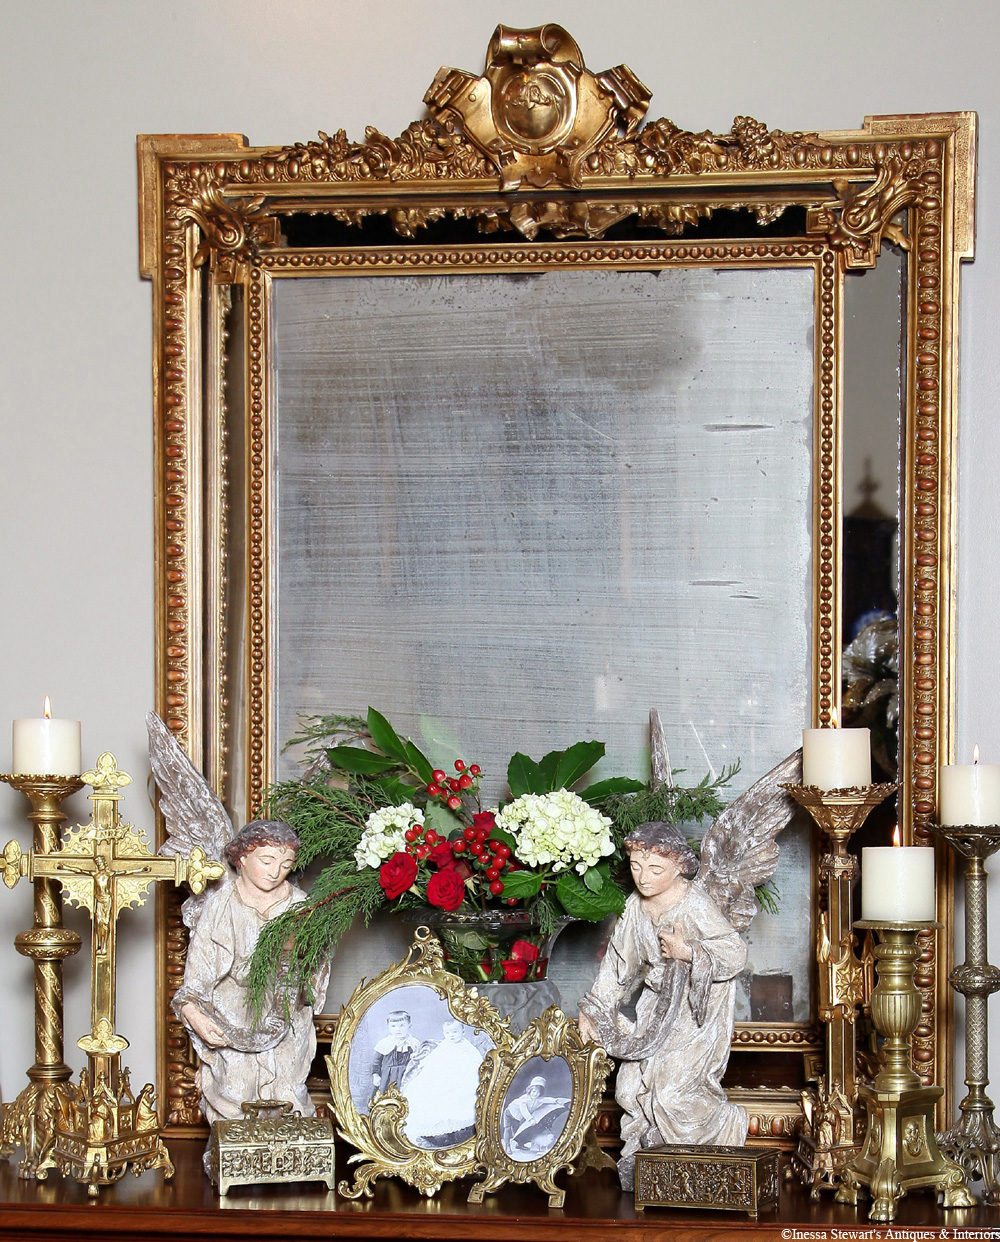 Antique accessories, mirror, Christmas decorations, and flowers at Inessa Stewart's Antiques